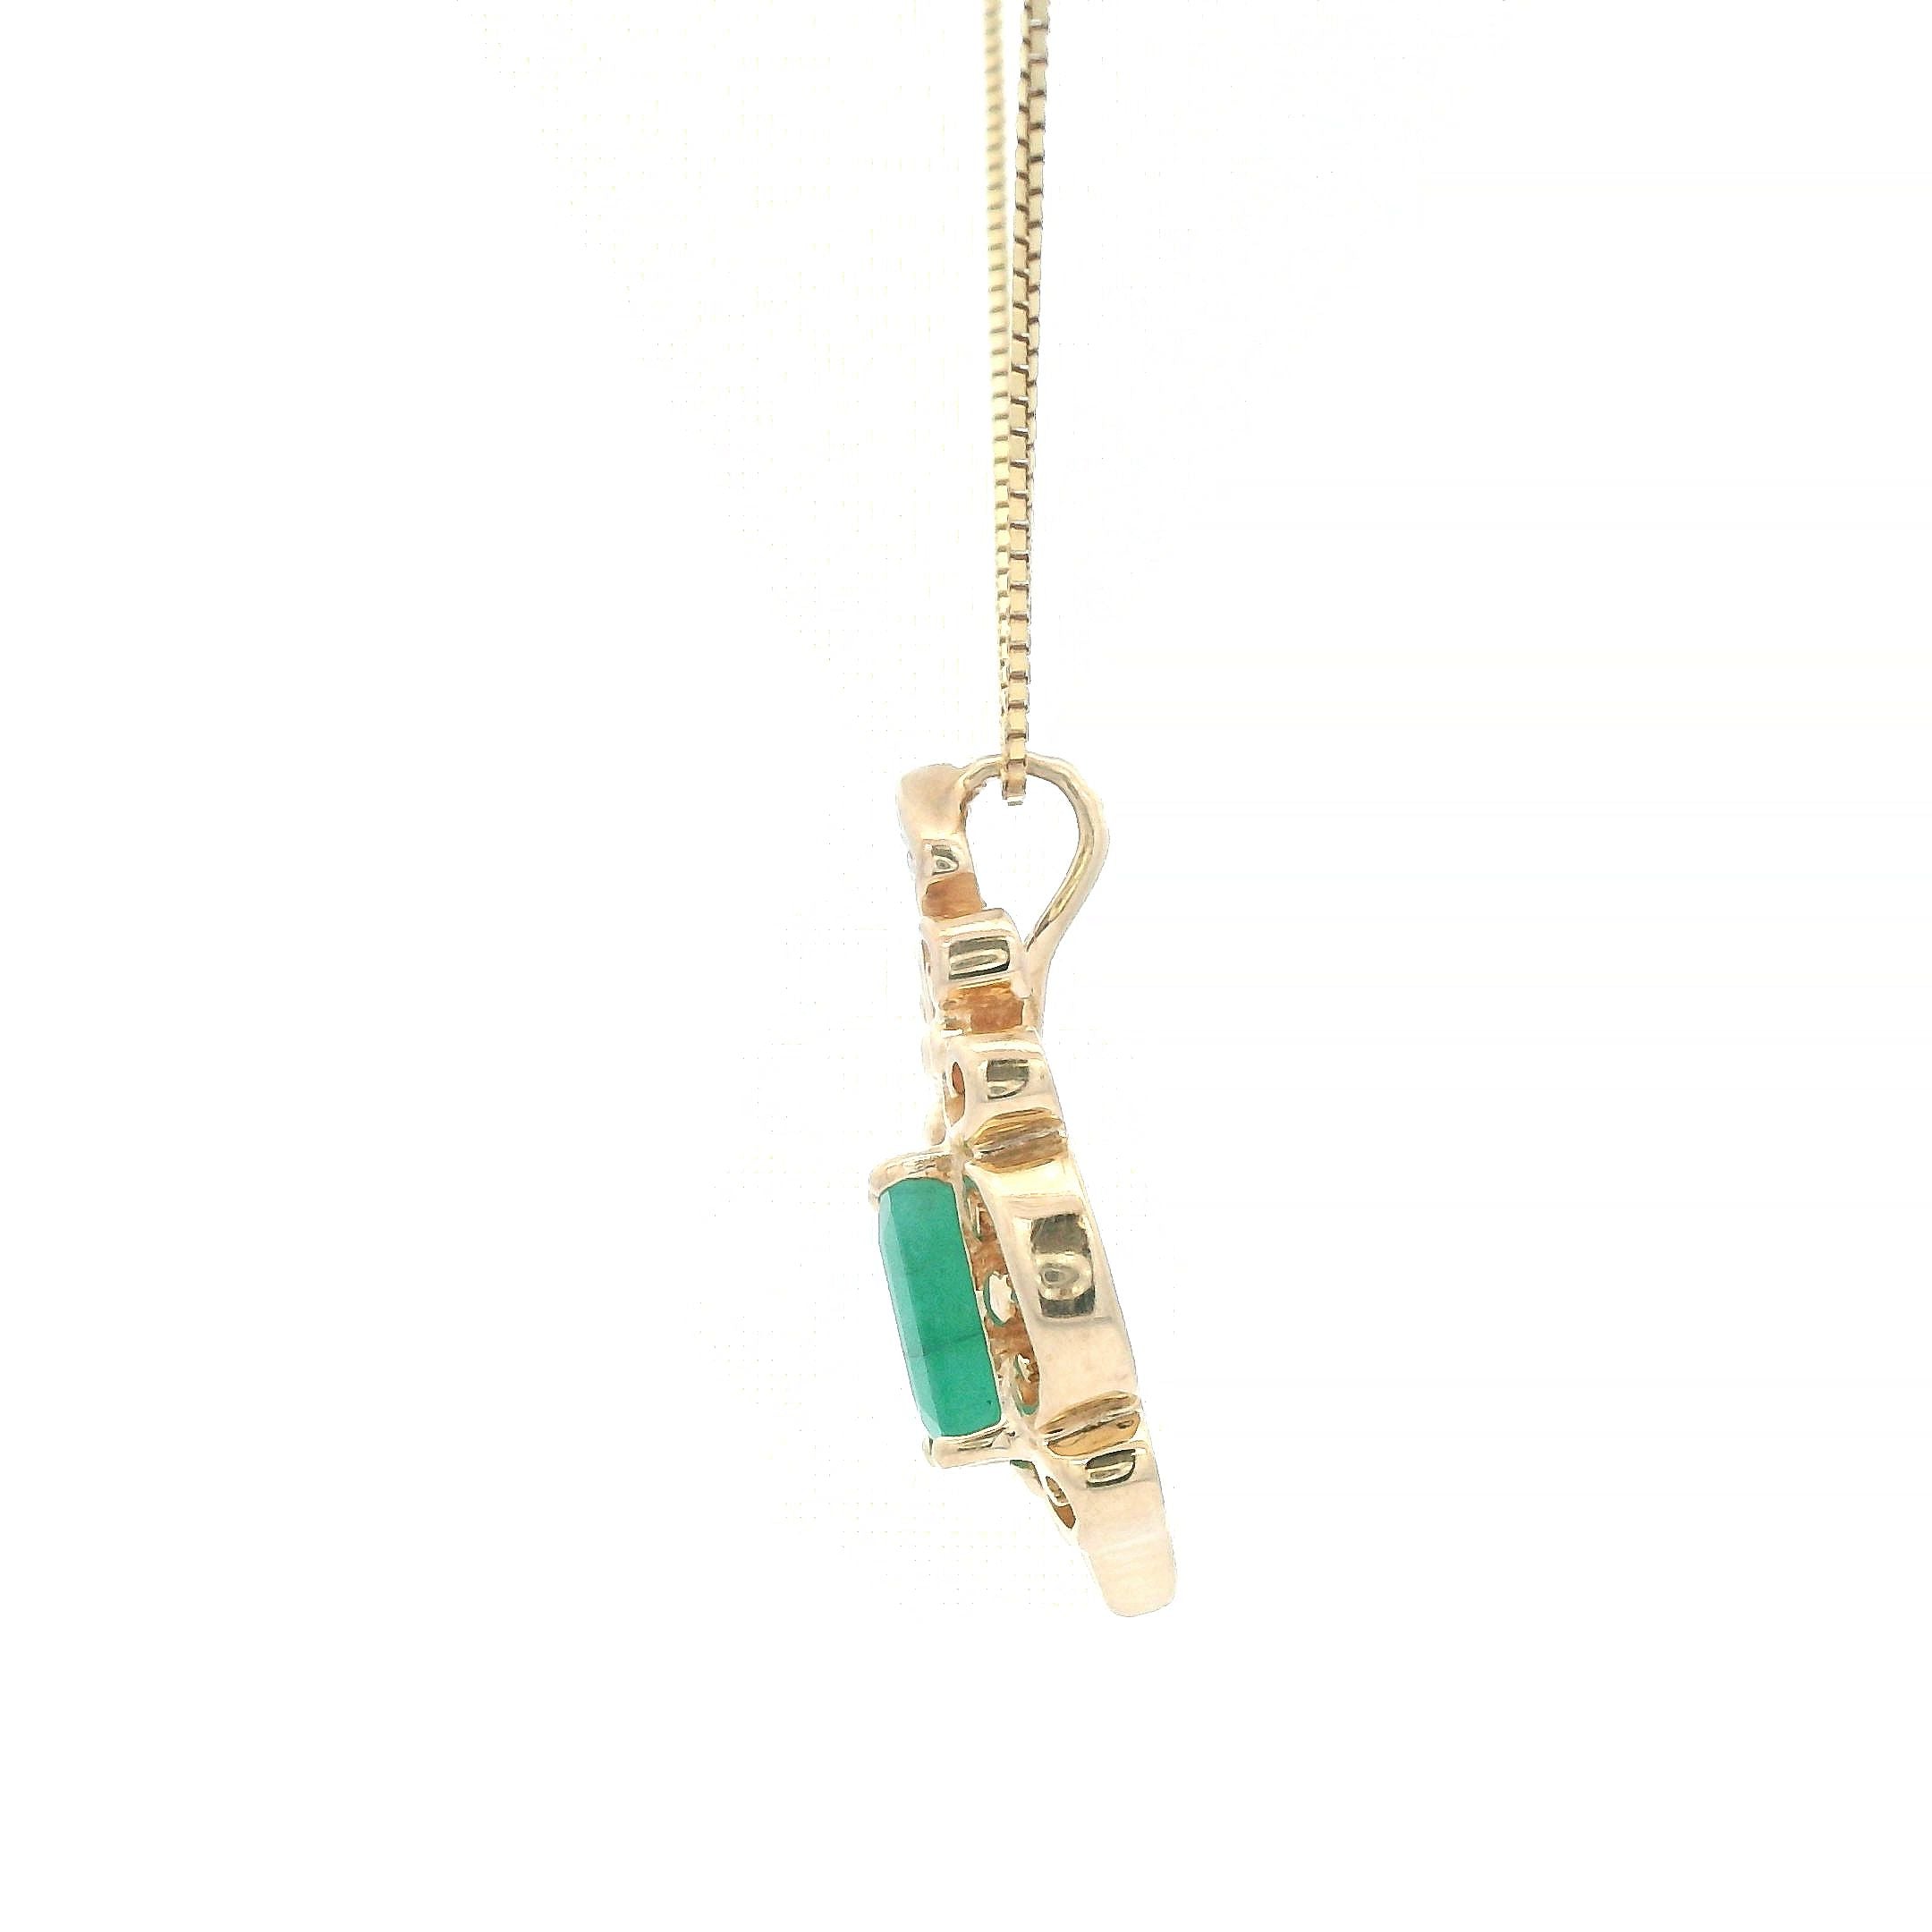 Estate Collection: 10K Yellow Gold Ornate Emerald-Cut Emerald and Diamond Pendant Necklace